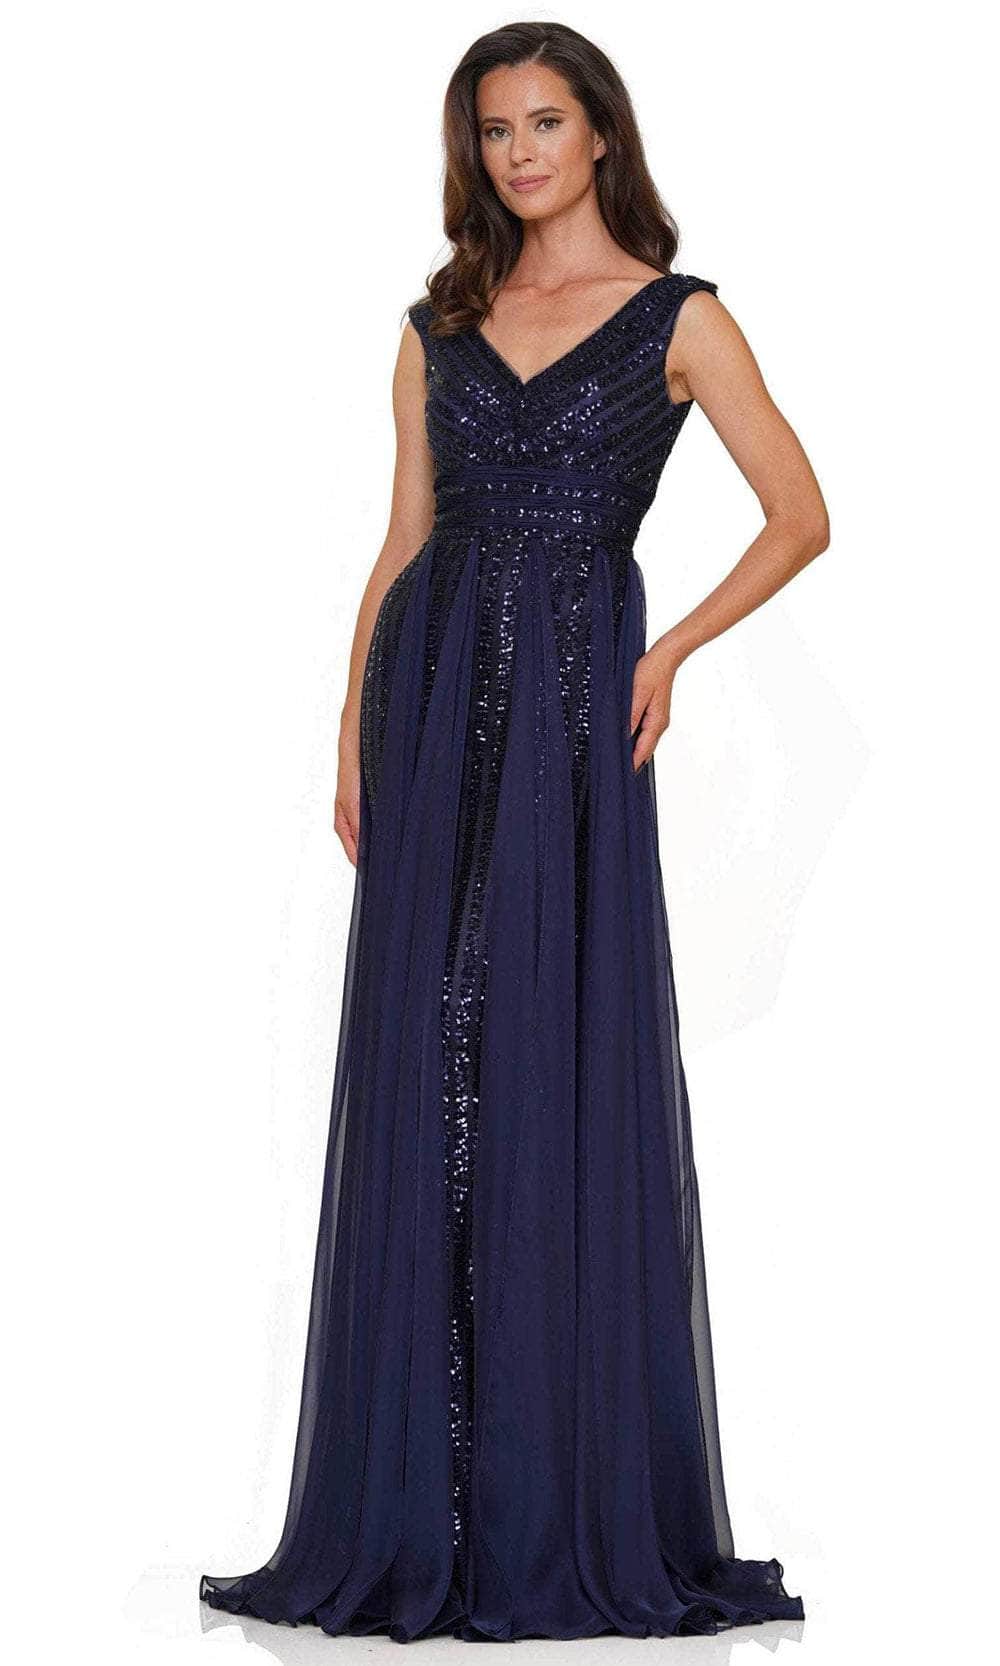 Marsoni by Colors M314 - Embellished A-Line Evening Dress Special Occasion Dress 4 / Navy